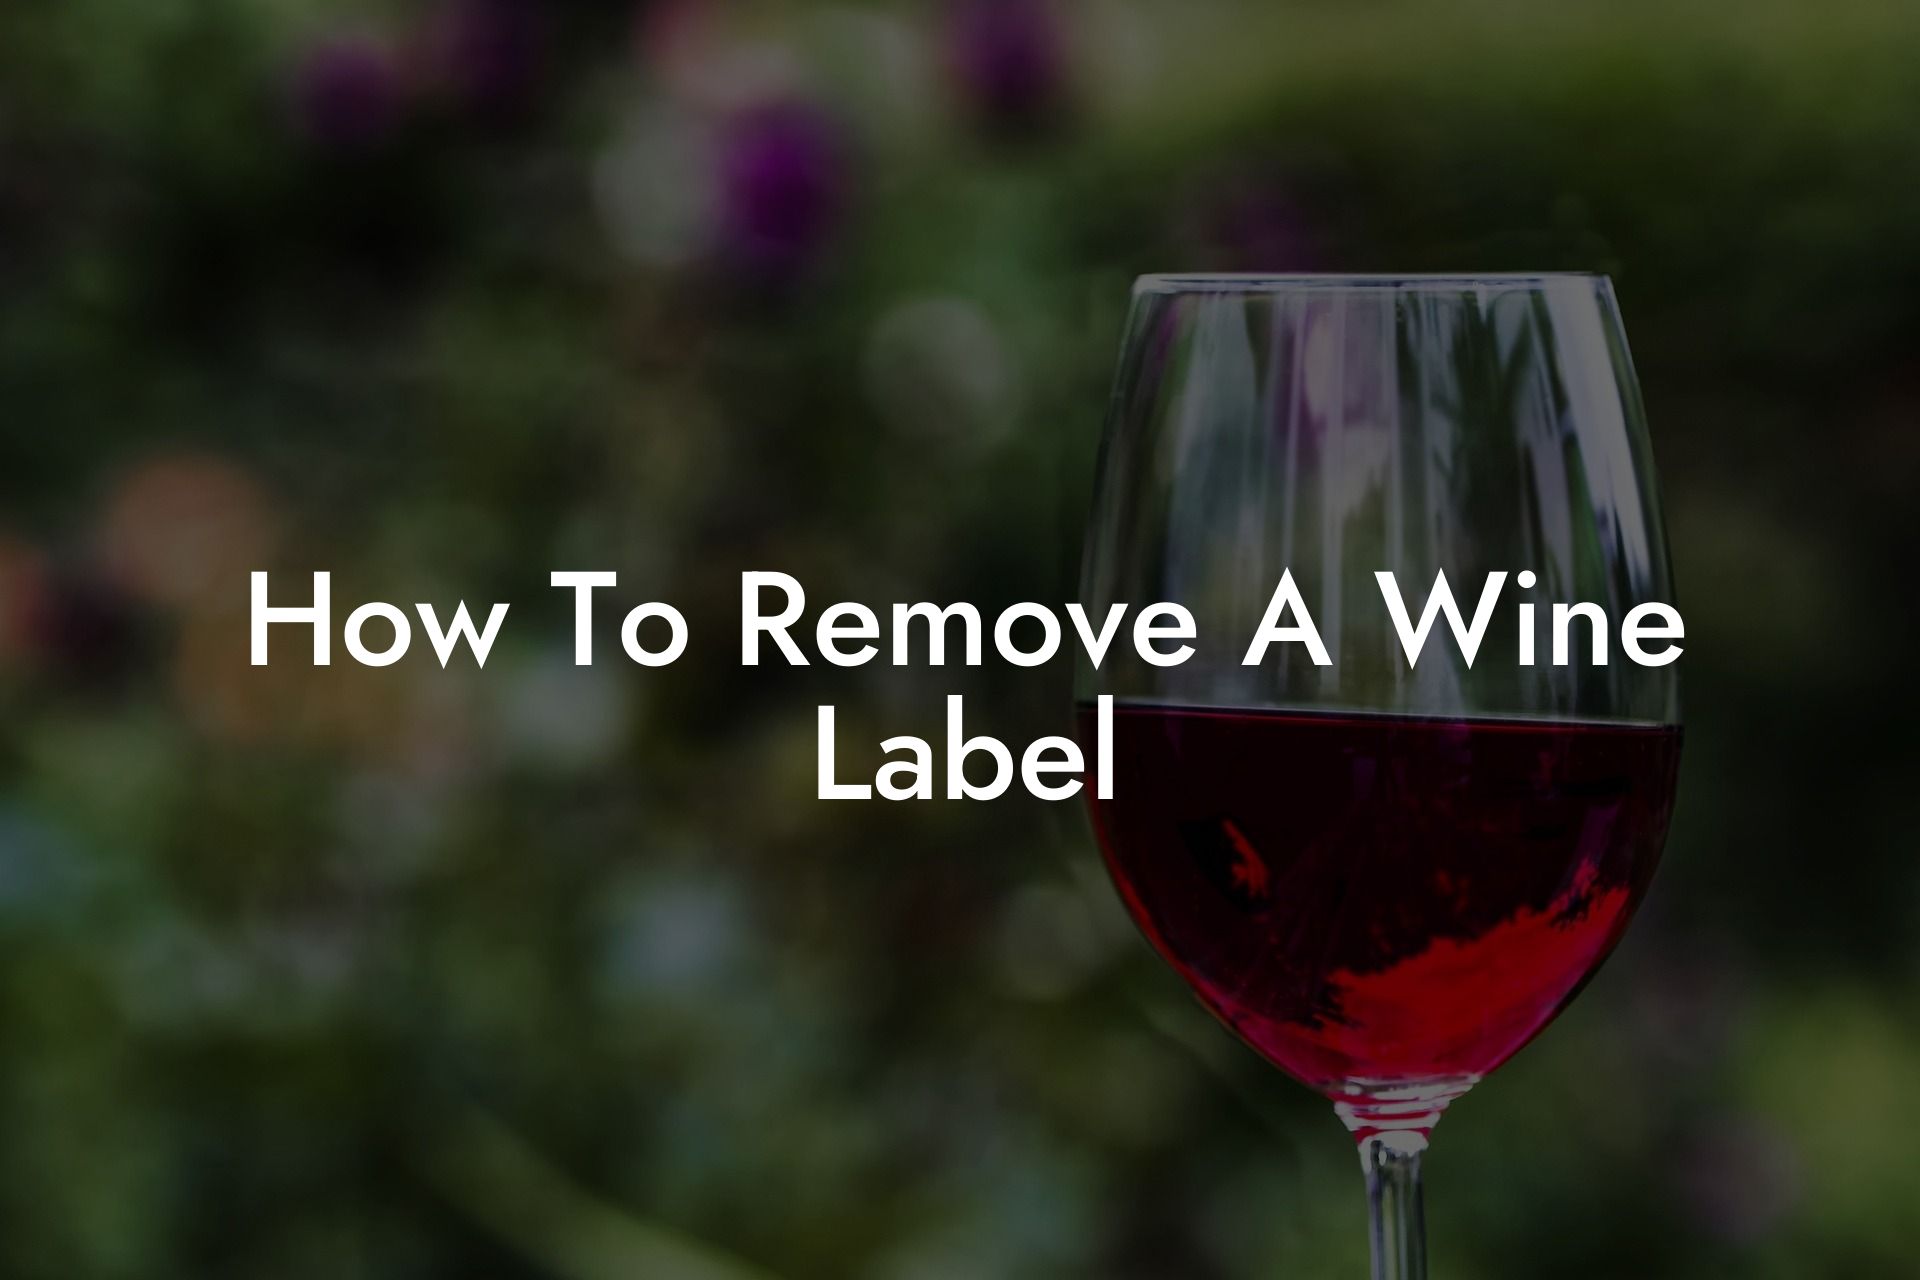 How To Remove A Wine Label